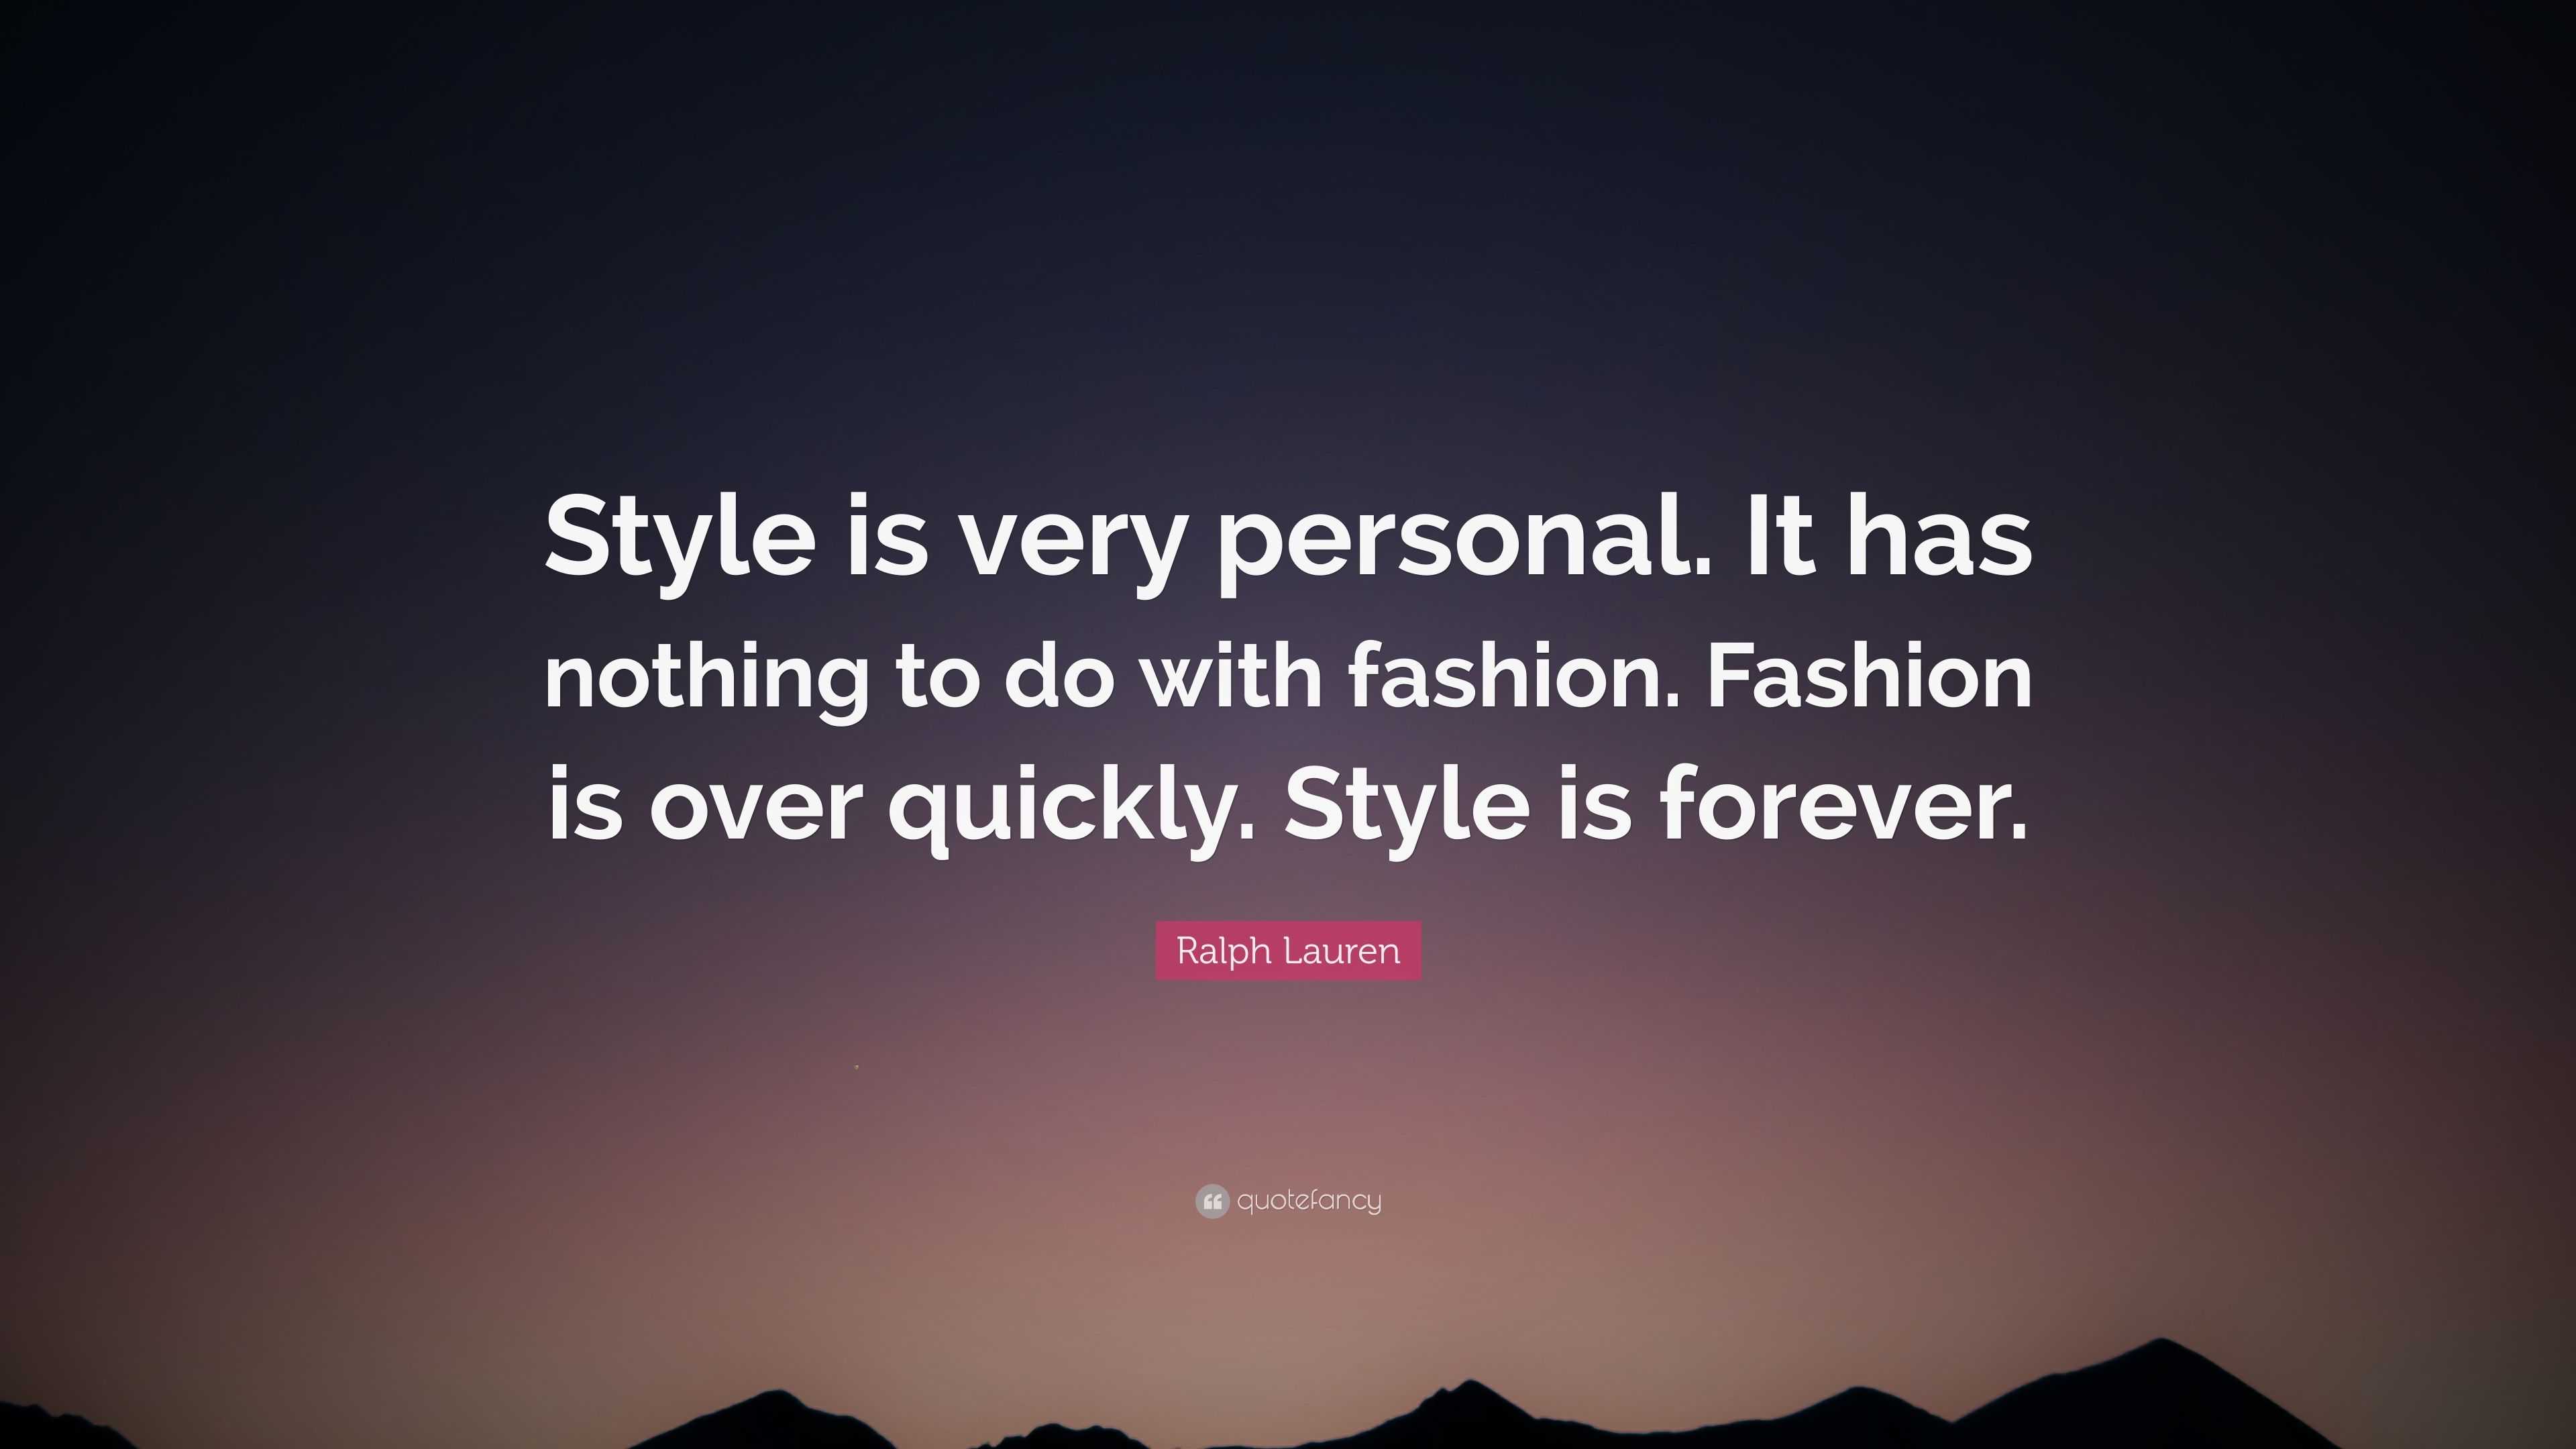 Ralph Lauren Quote: “Style is very personal. It has nothing to do with ...